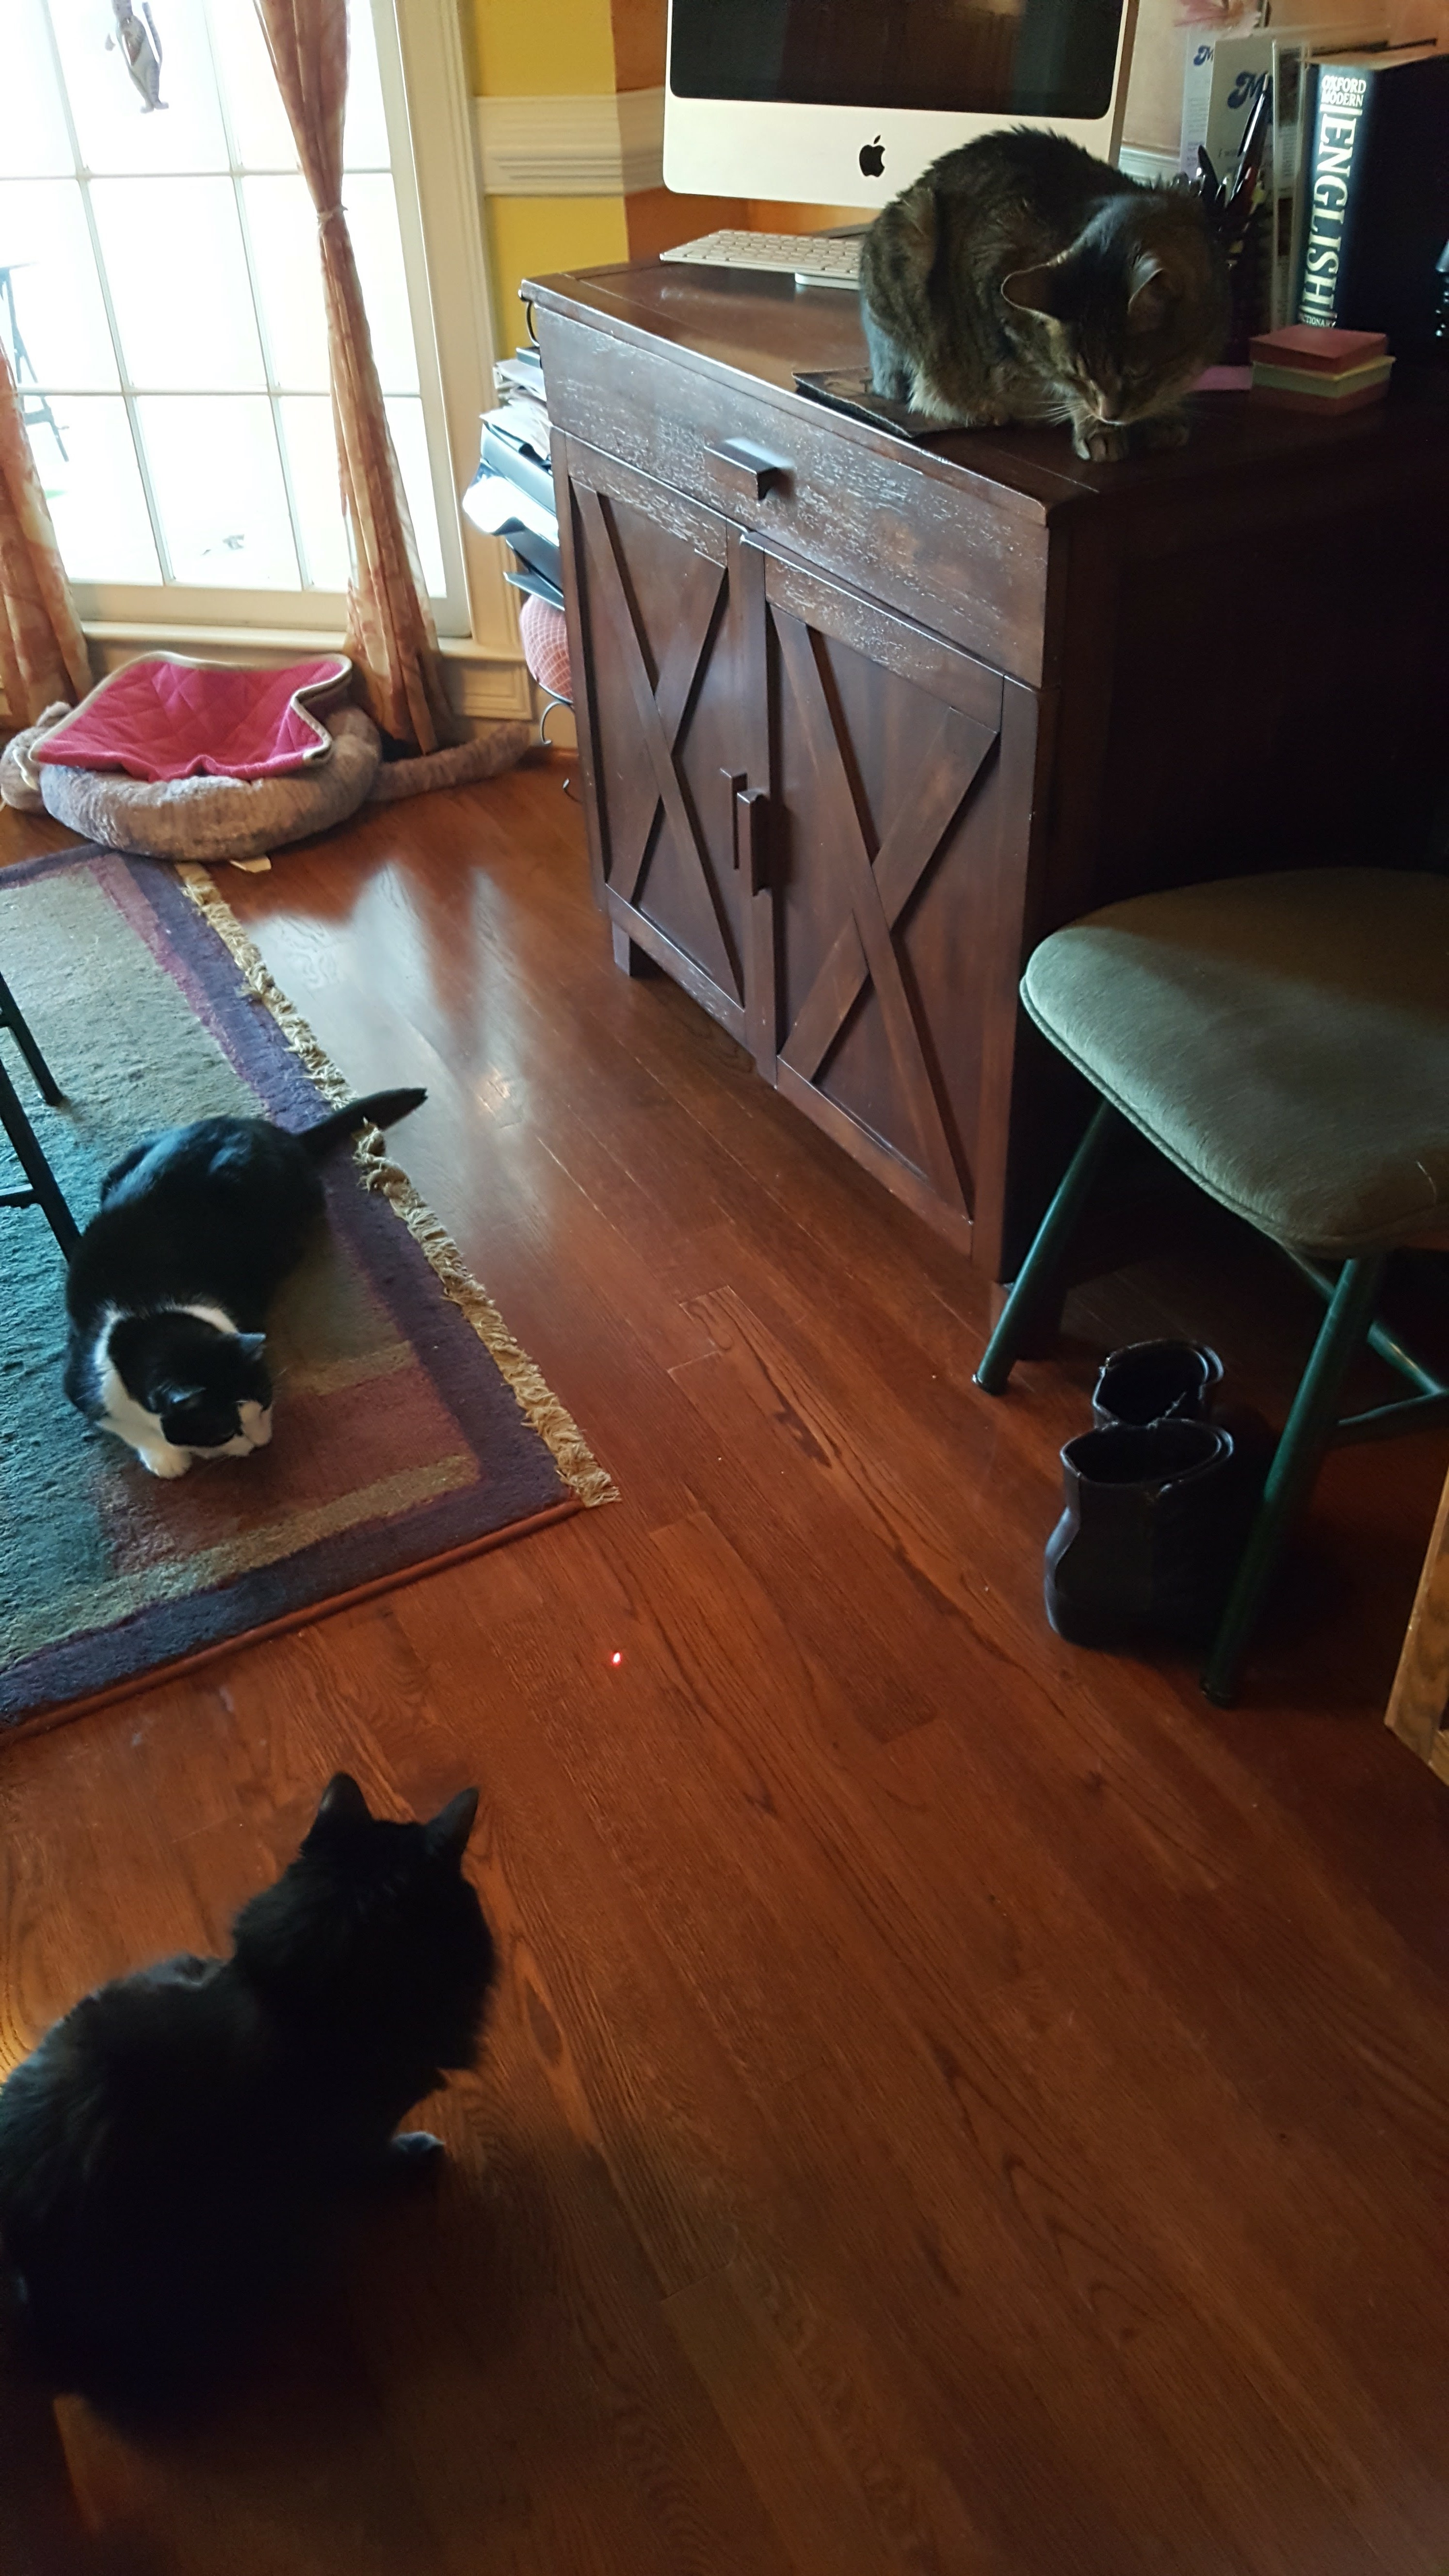 All three cats together in one room playing. 